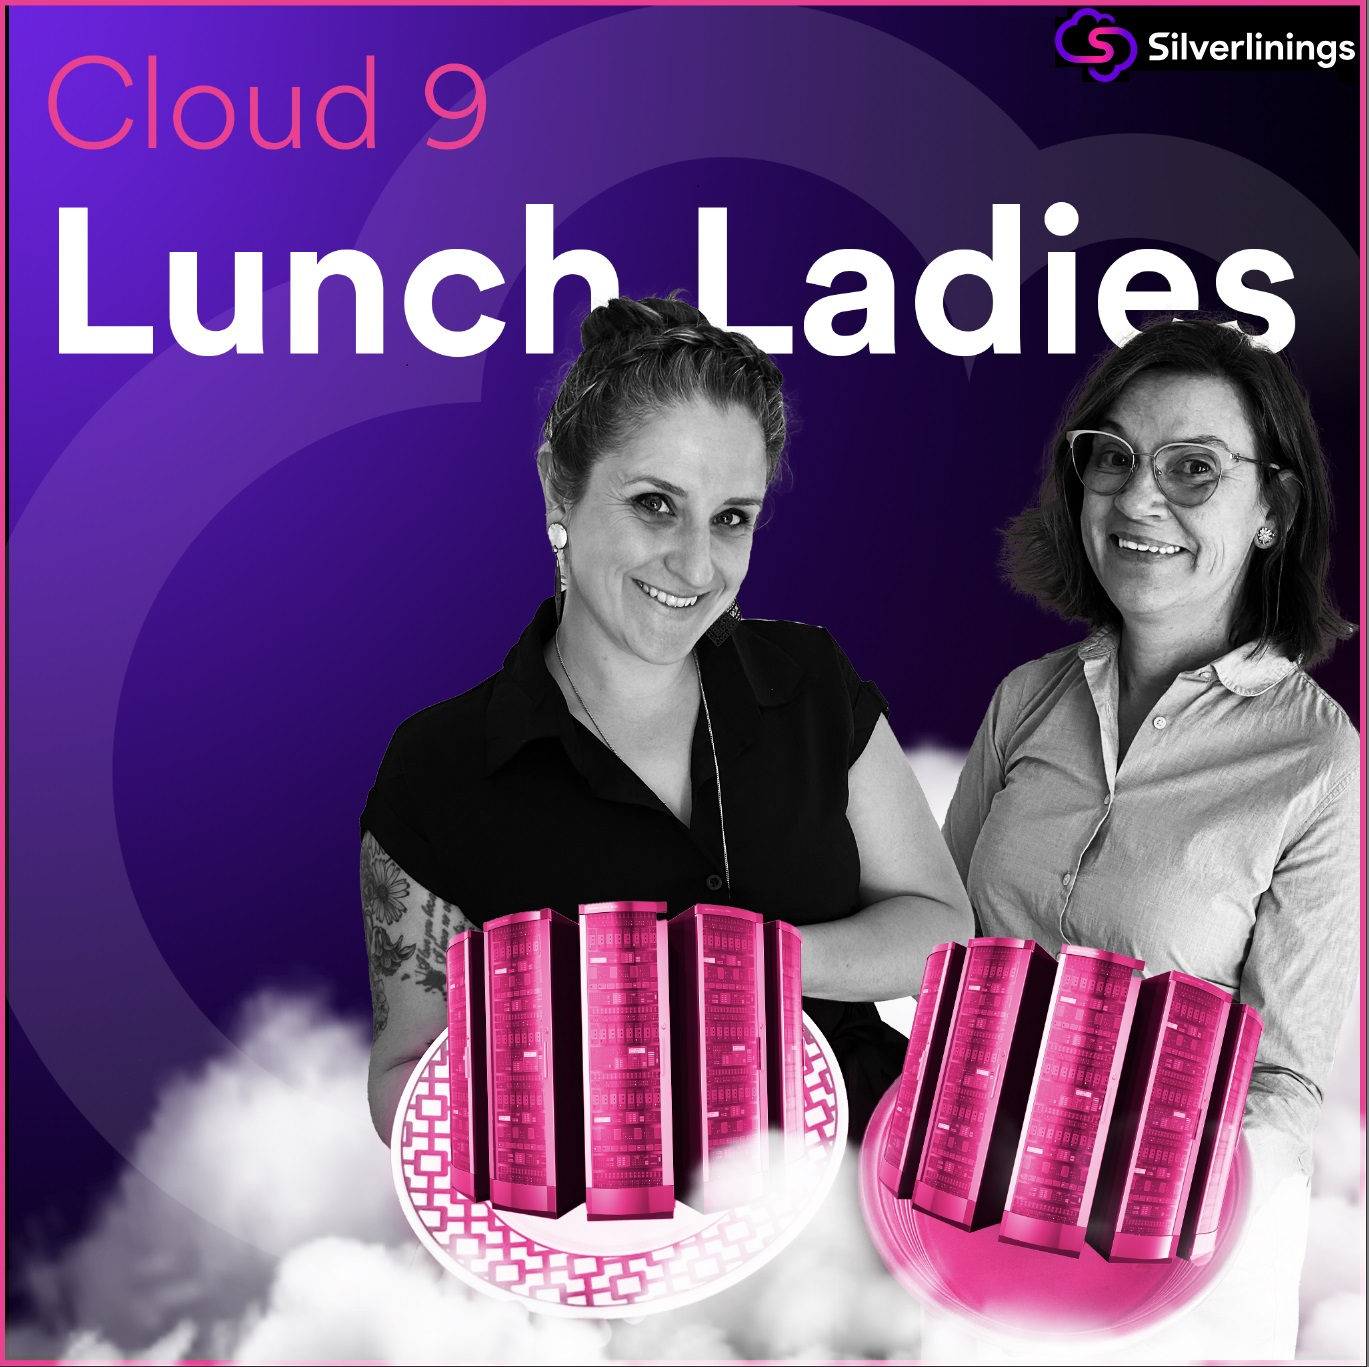 Lunch Ladies News Wrap: Now serving cloud updates on Nokia, Ericsson, Rakuten and Nathan's hotdogs